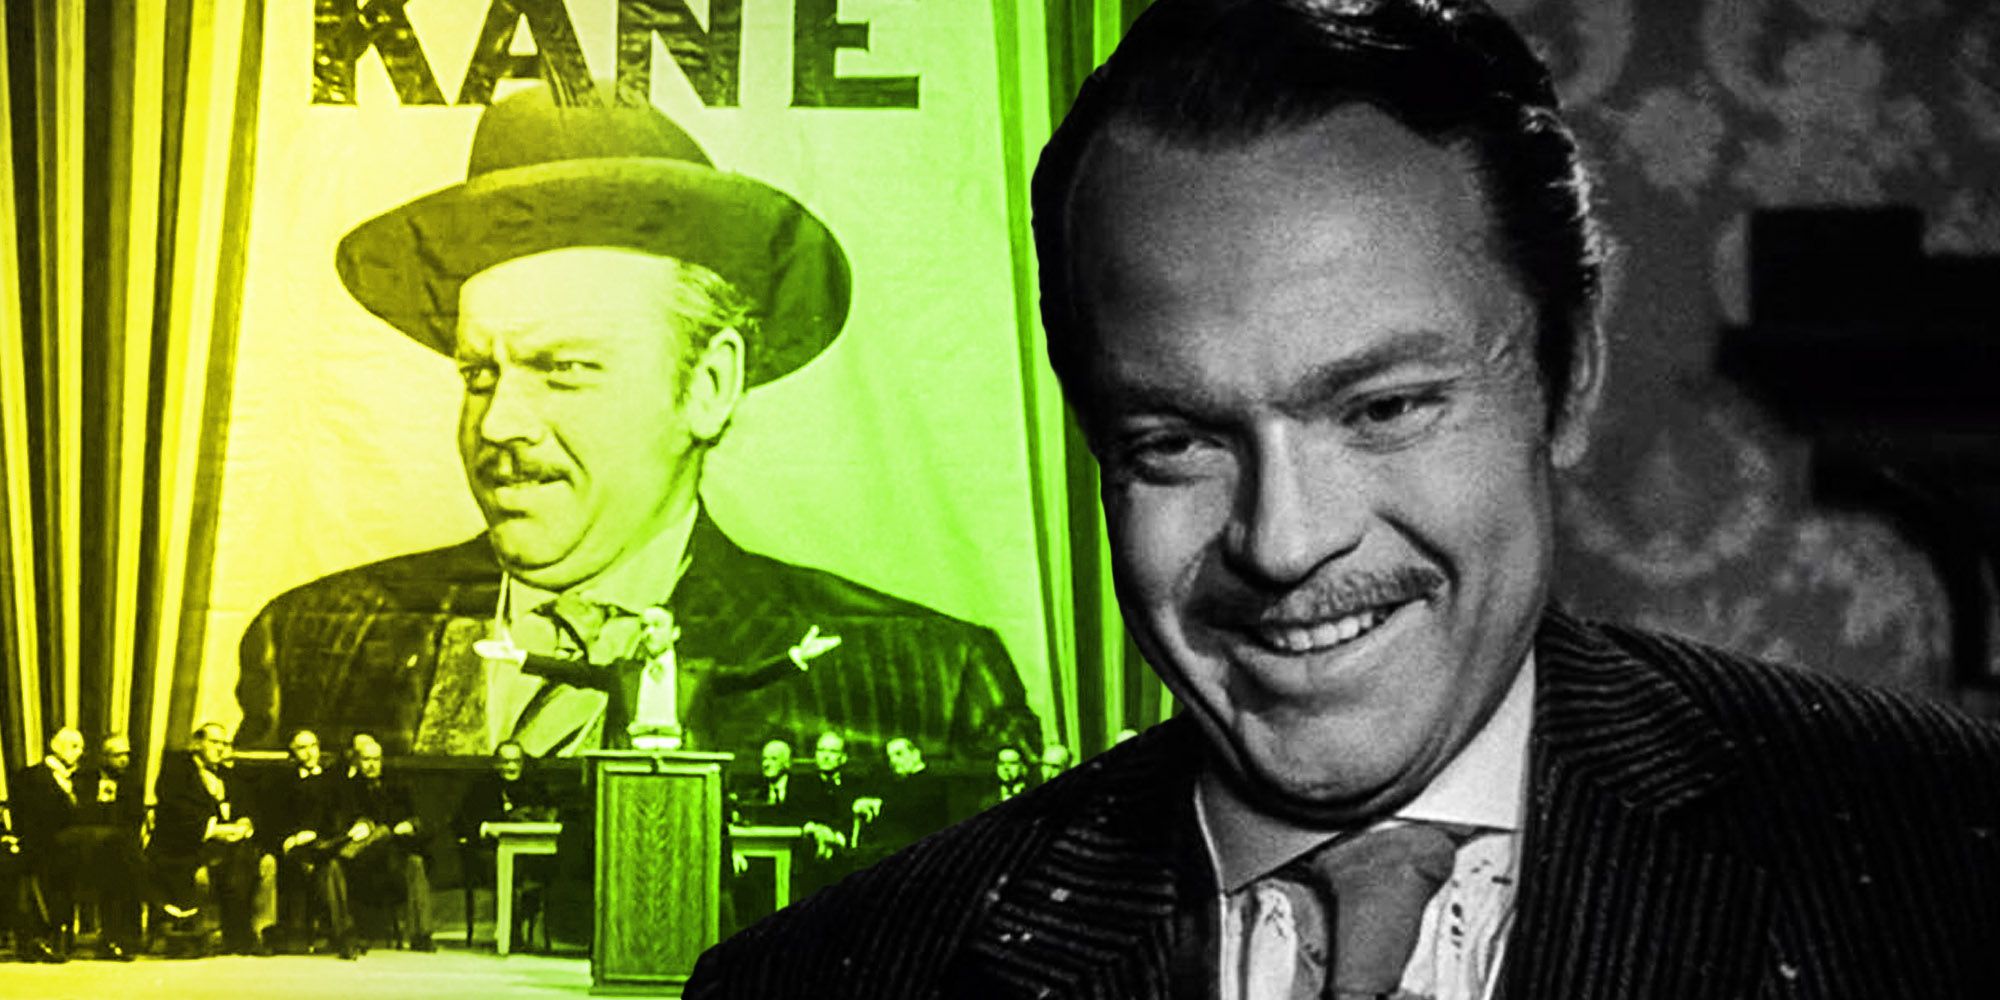 Citizen Kane the Greatest Movie ever made